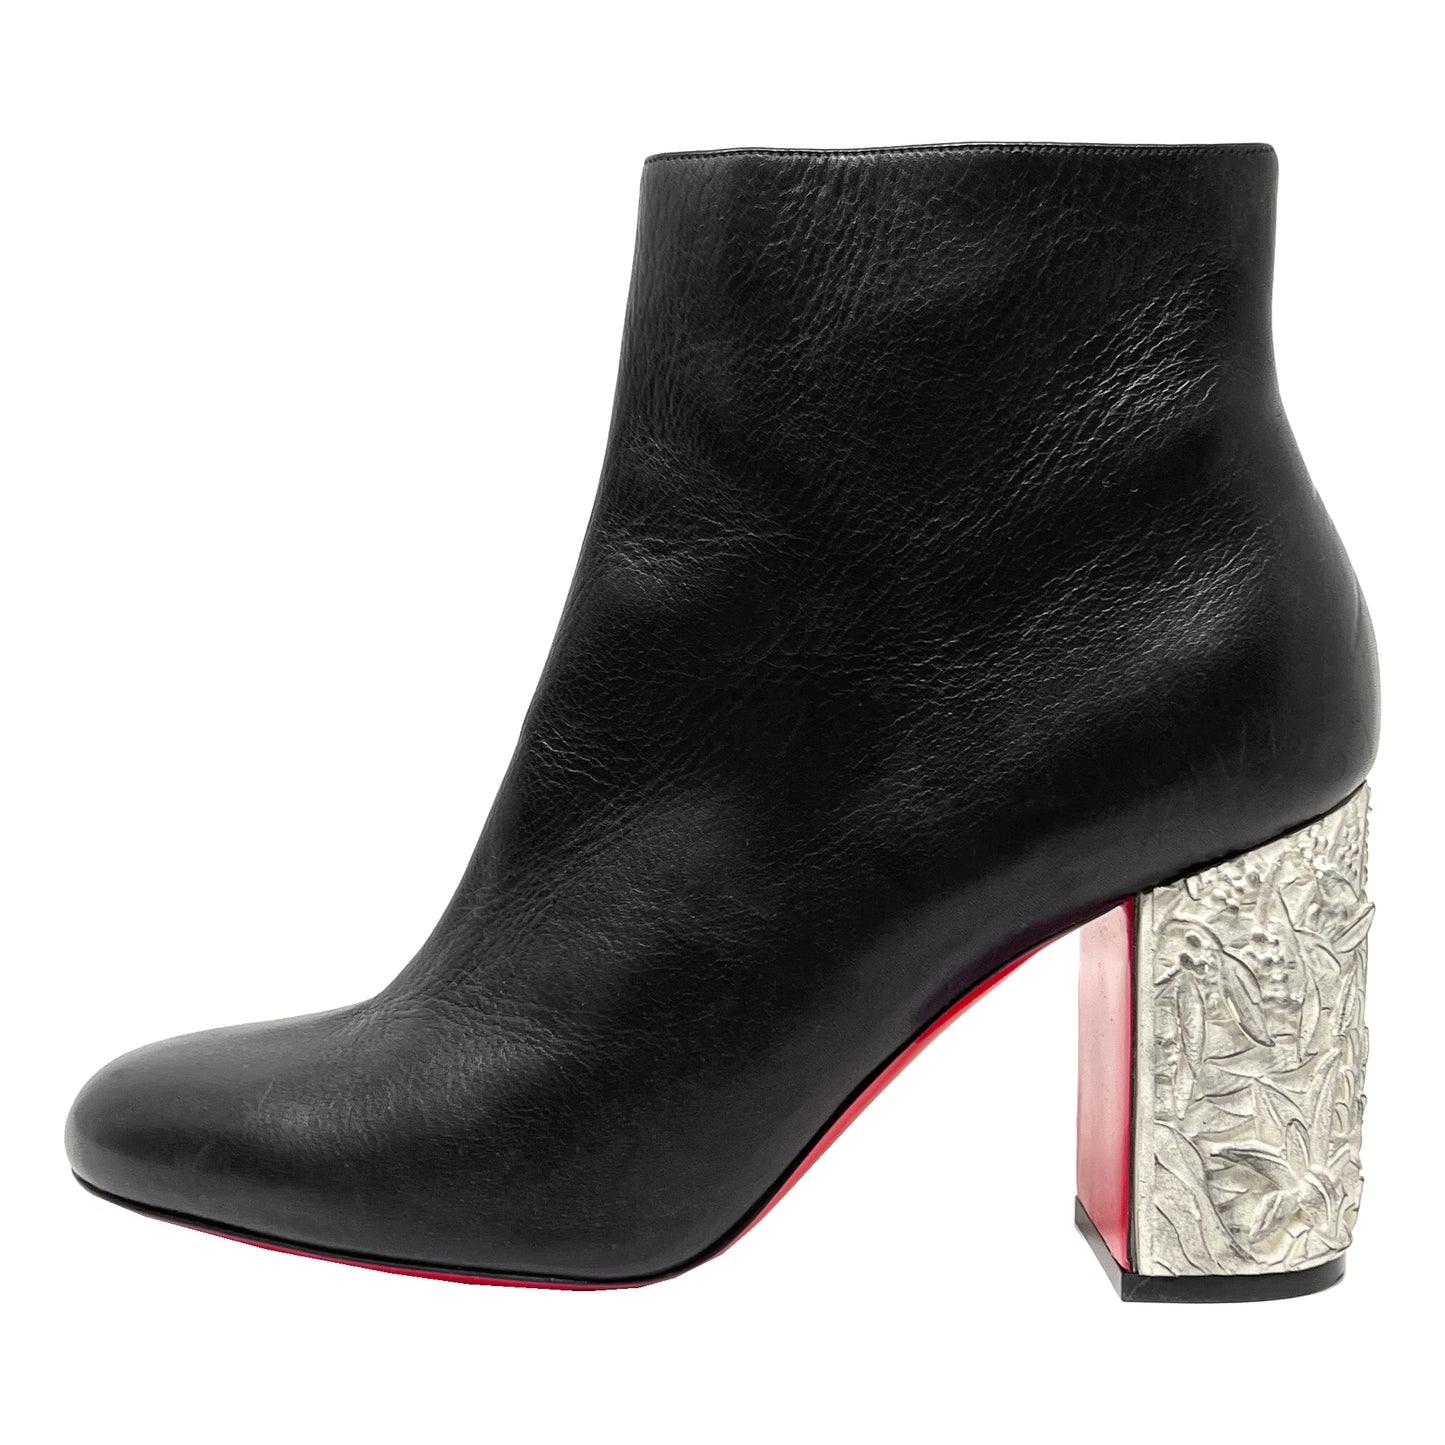 Christian Louboutin Bas Relief Pietra 85 Black Leather Carved Block Heel Ankle Boots